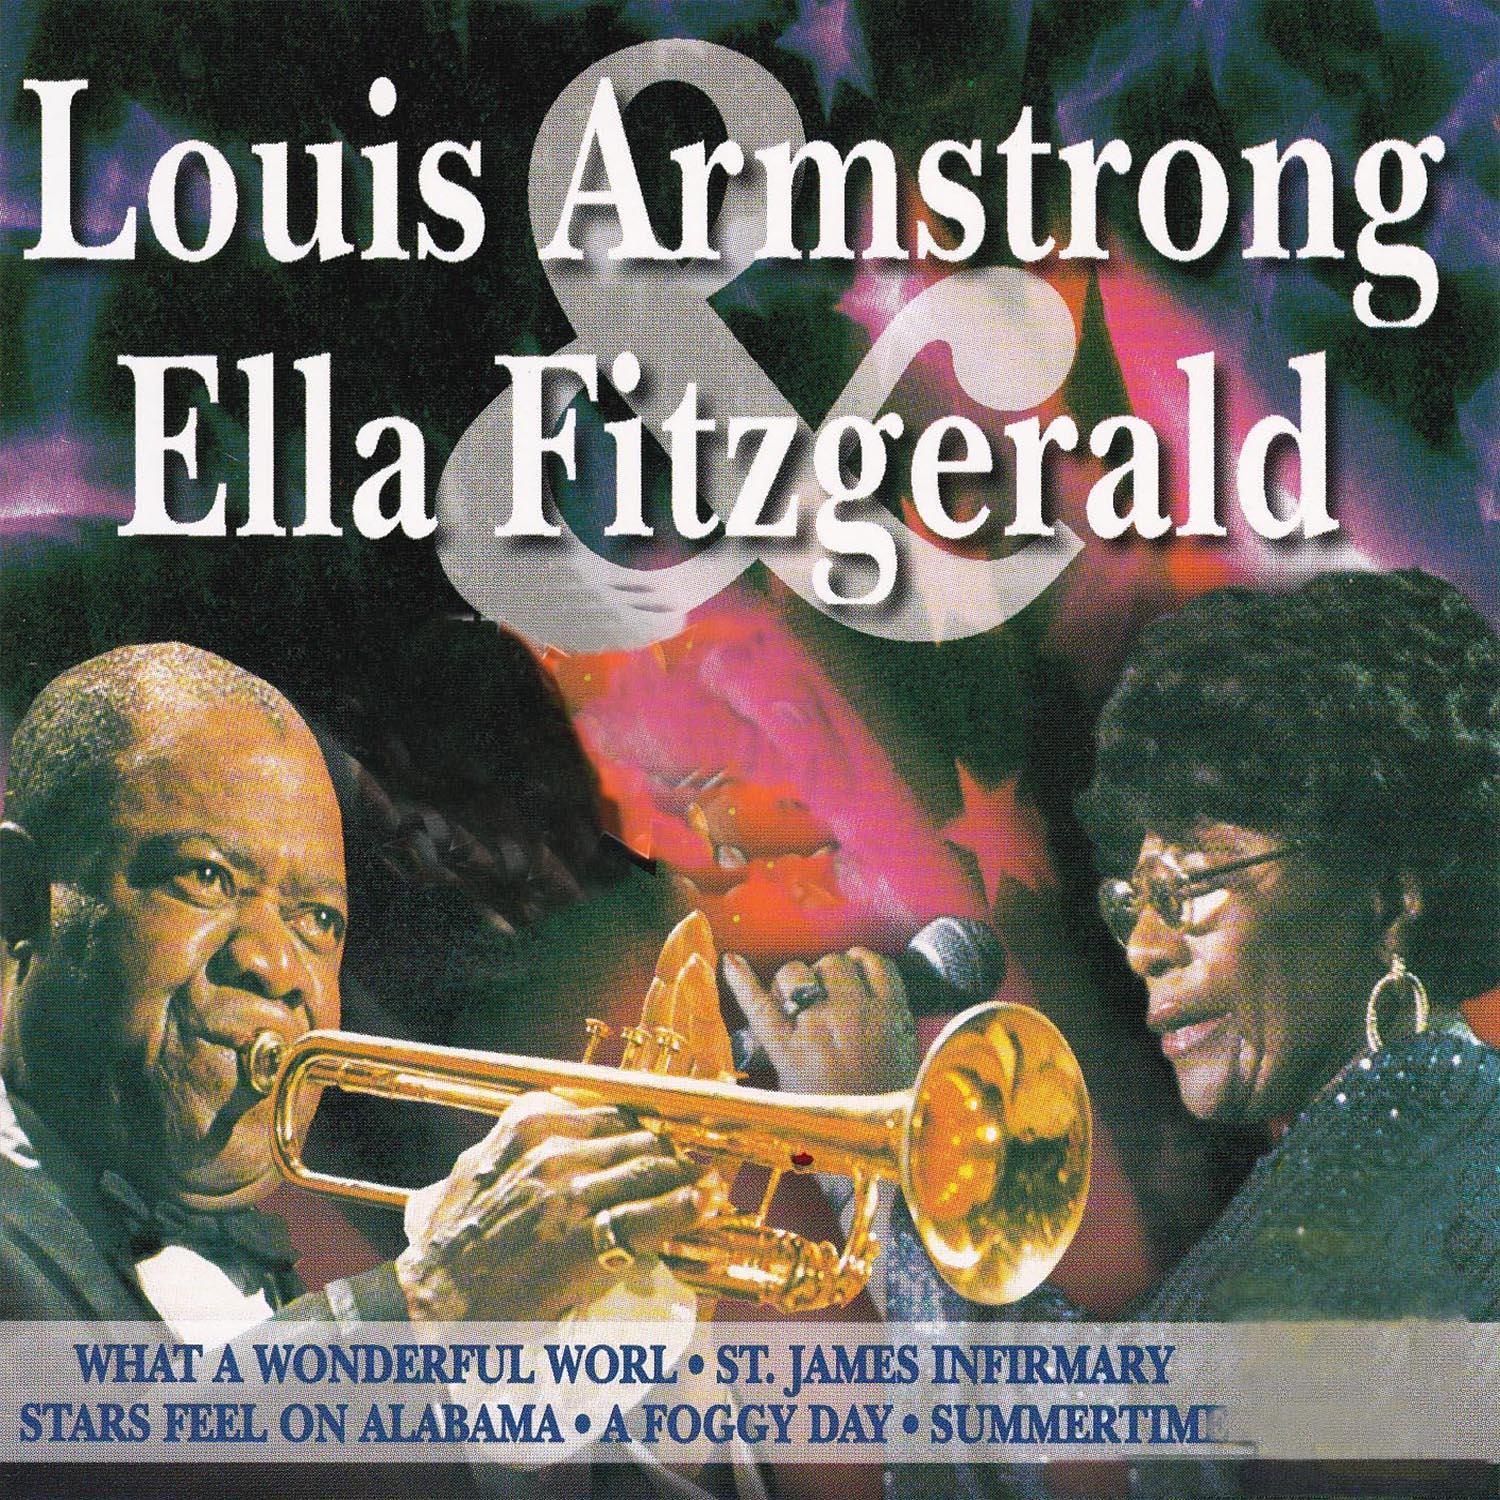 Louis Armstrong & Ella Fitzgerald专辑